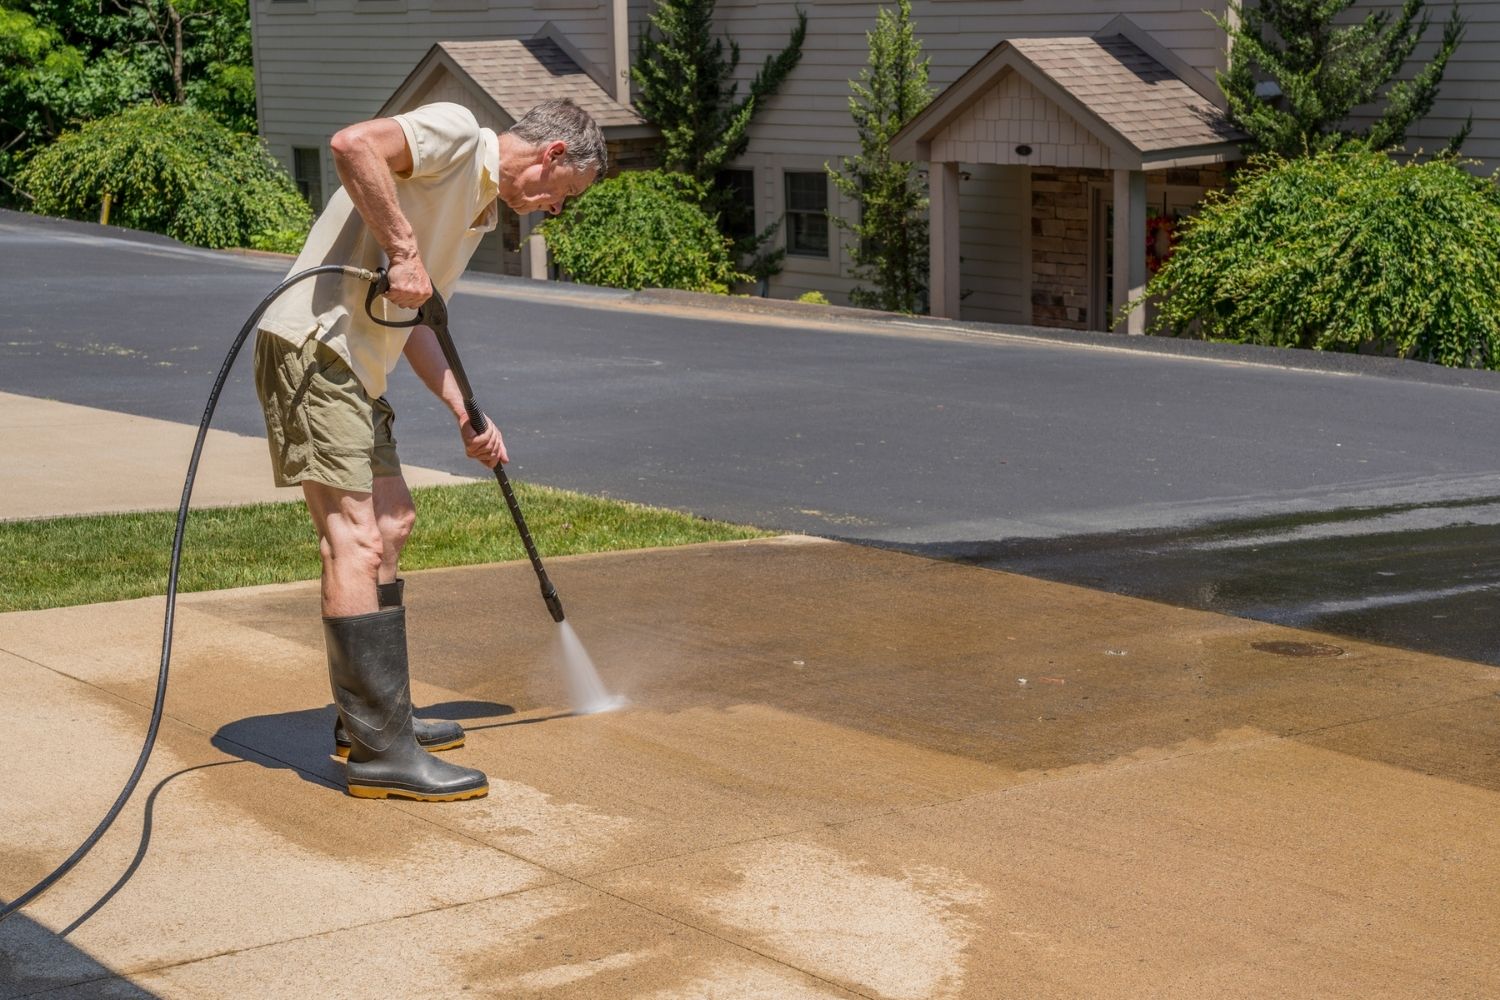 A worker wearing rubber boots pressure washes a concrete driveway in a residential neighborhood.